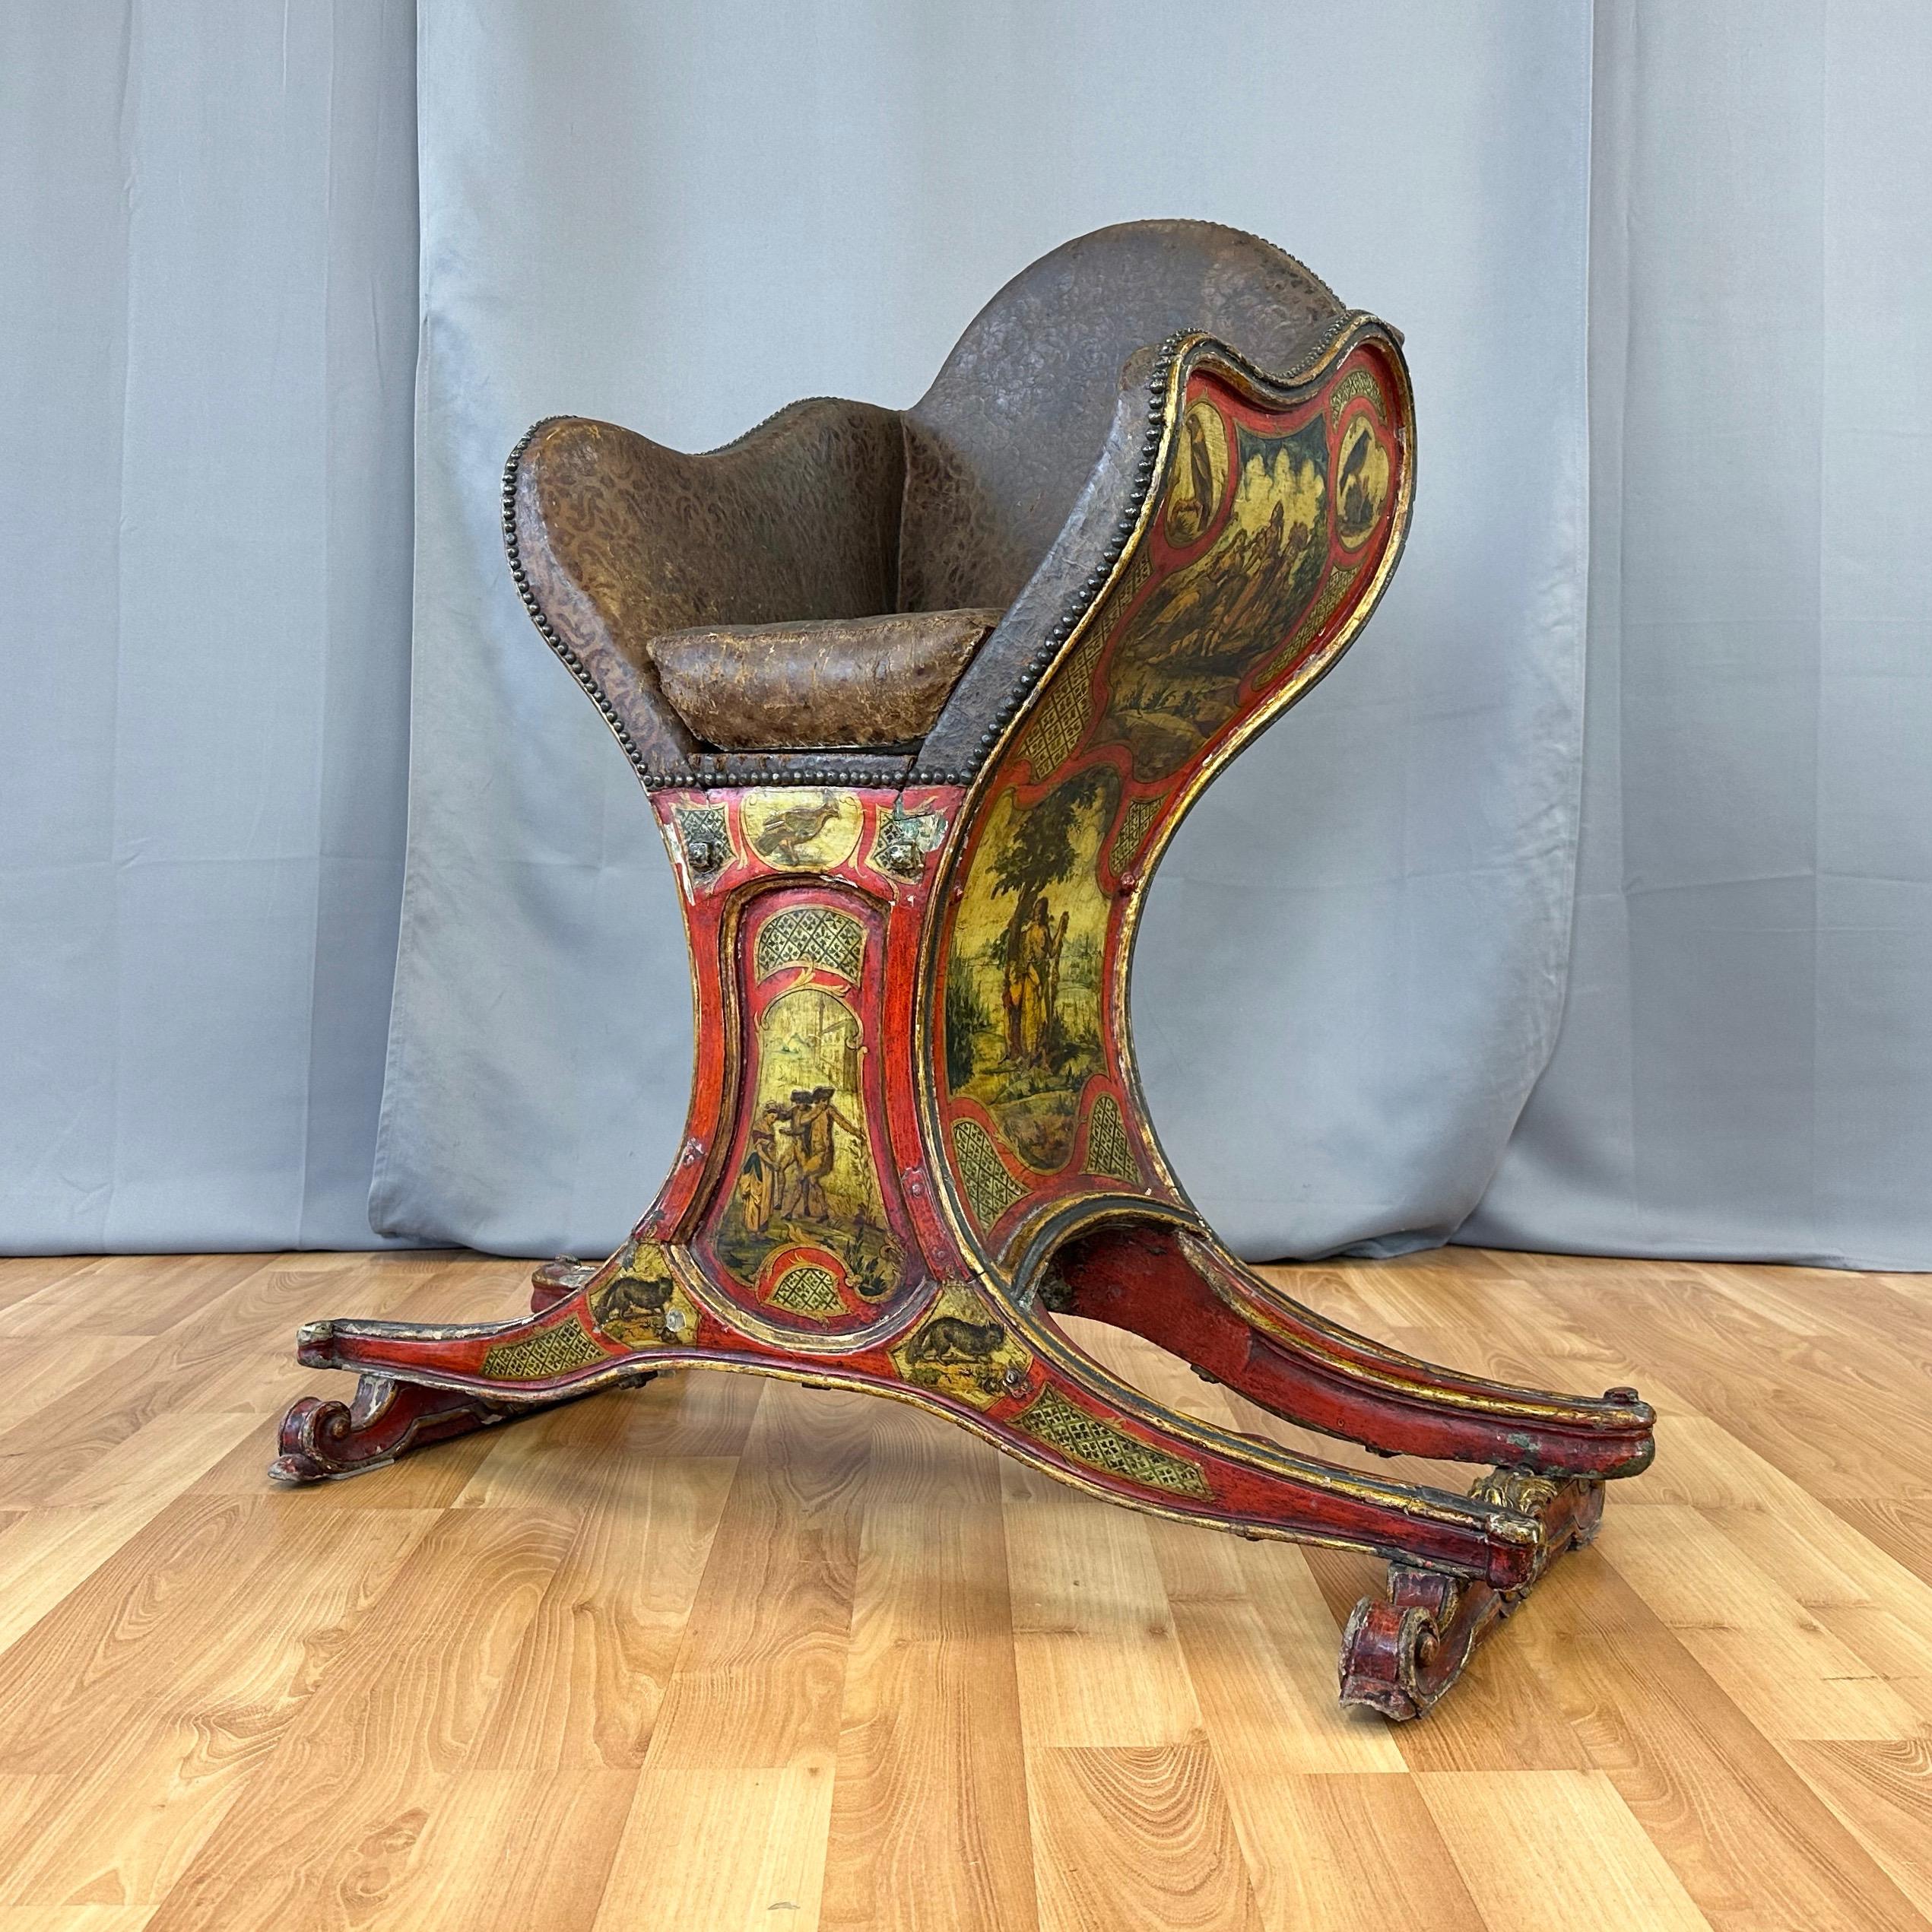 Rococo Revival Venetian Illustrated, Polychrome, Gilt, and Leather Gondola Chair, c. 1820 For Sale